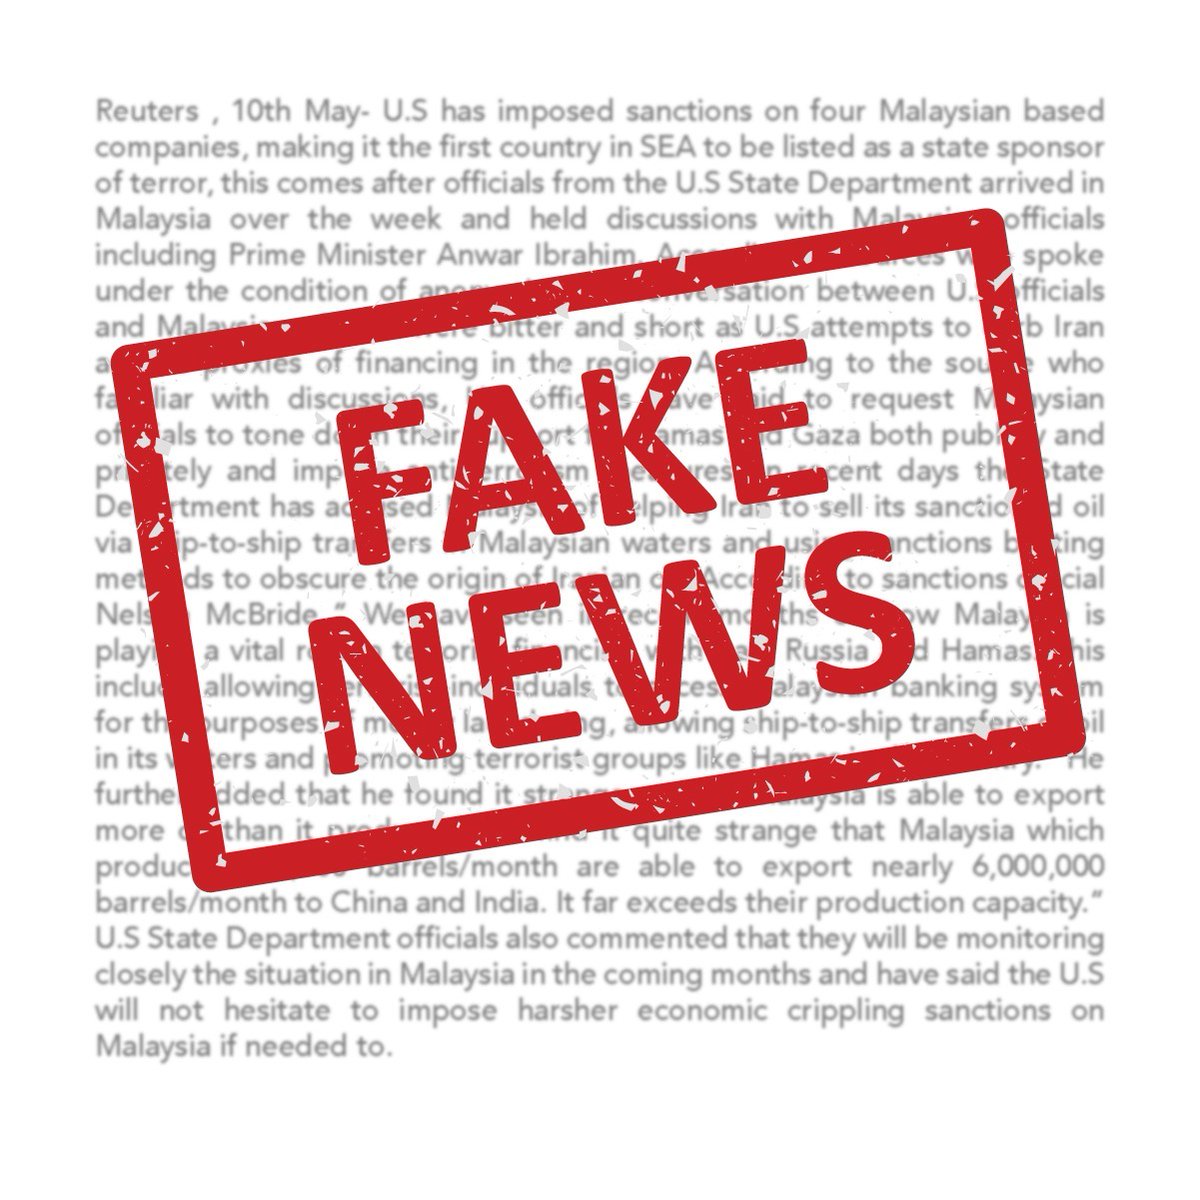 FAKE NEWS ALERT: The United States has not imposed any new sanctions on Malaysian companies nor listed Malaysia as a state sponsor of terror. The hoax below circulating on WhatsApp and other social media is fake news. @Reuters @ReutersPR @komunikasi_gov @MCMC_RASMI